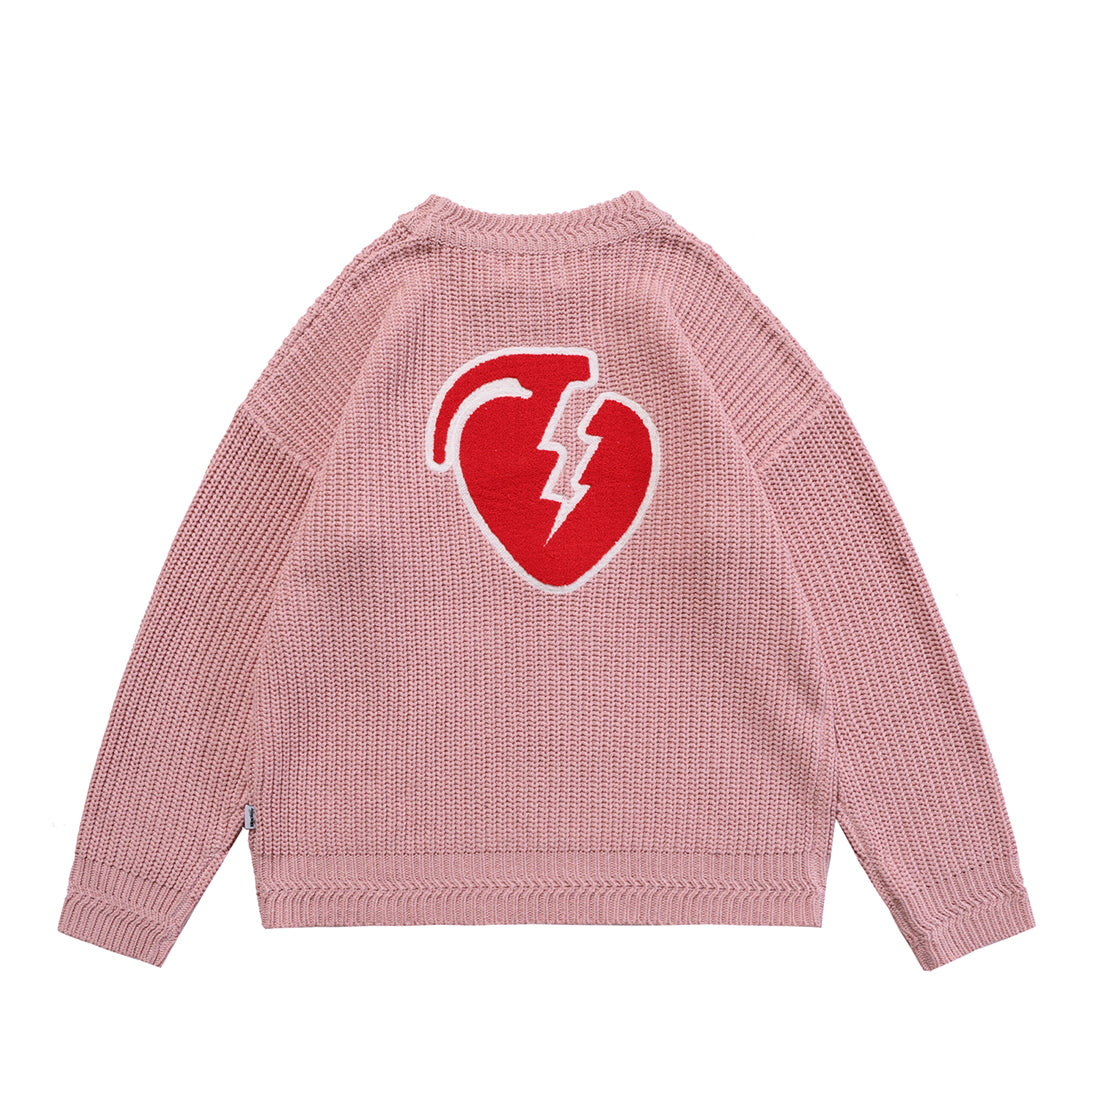 BOMB HEART KNITTED SWEATER